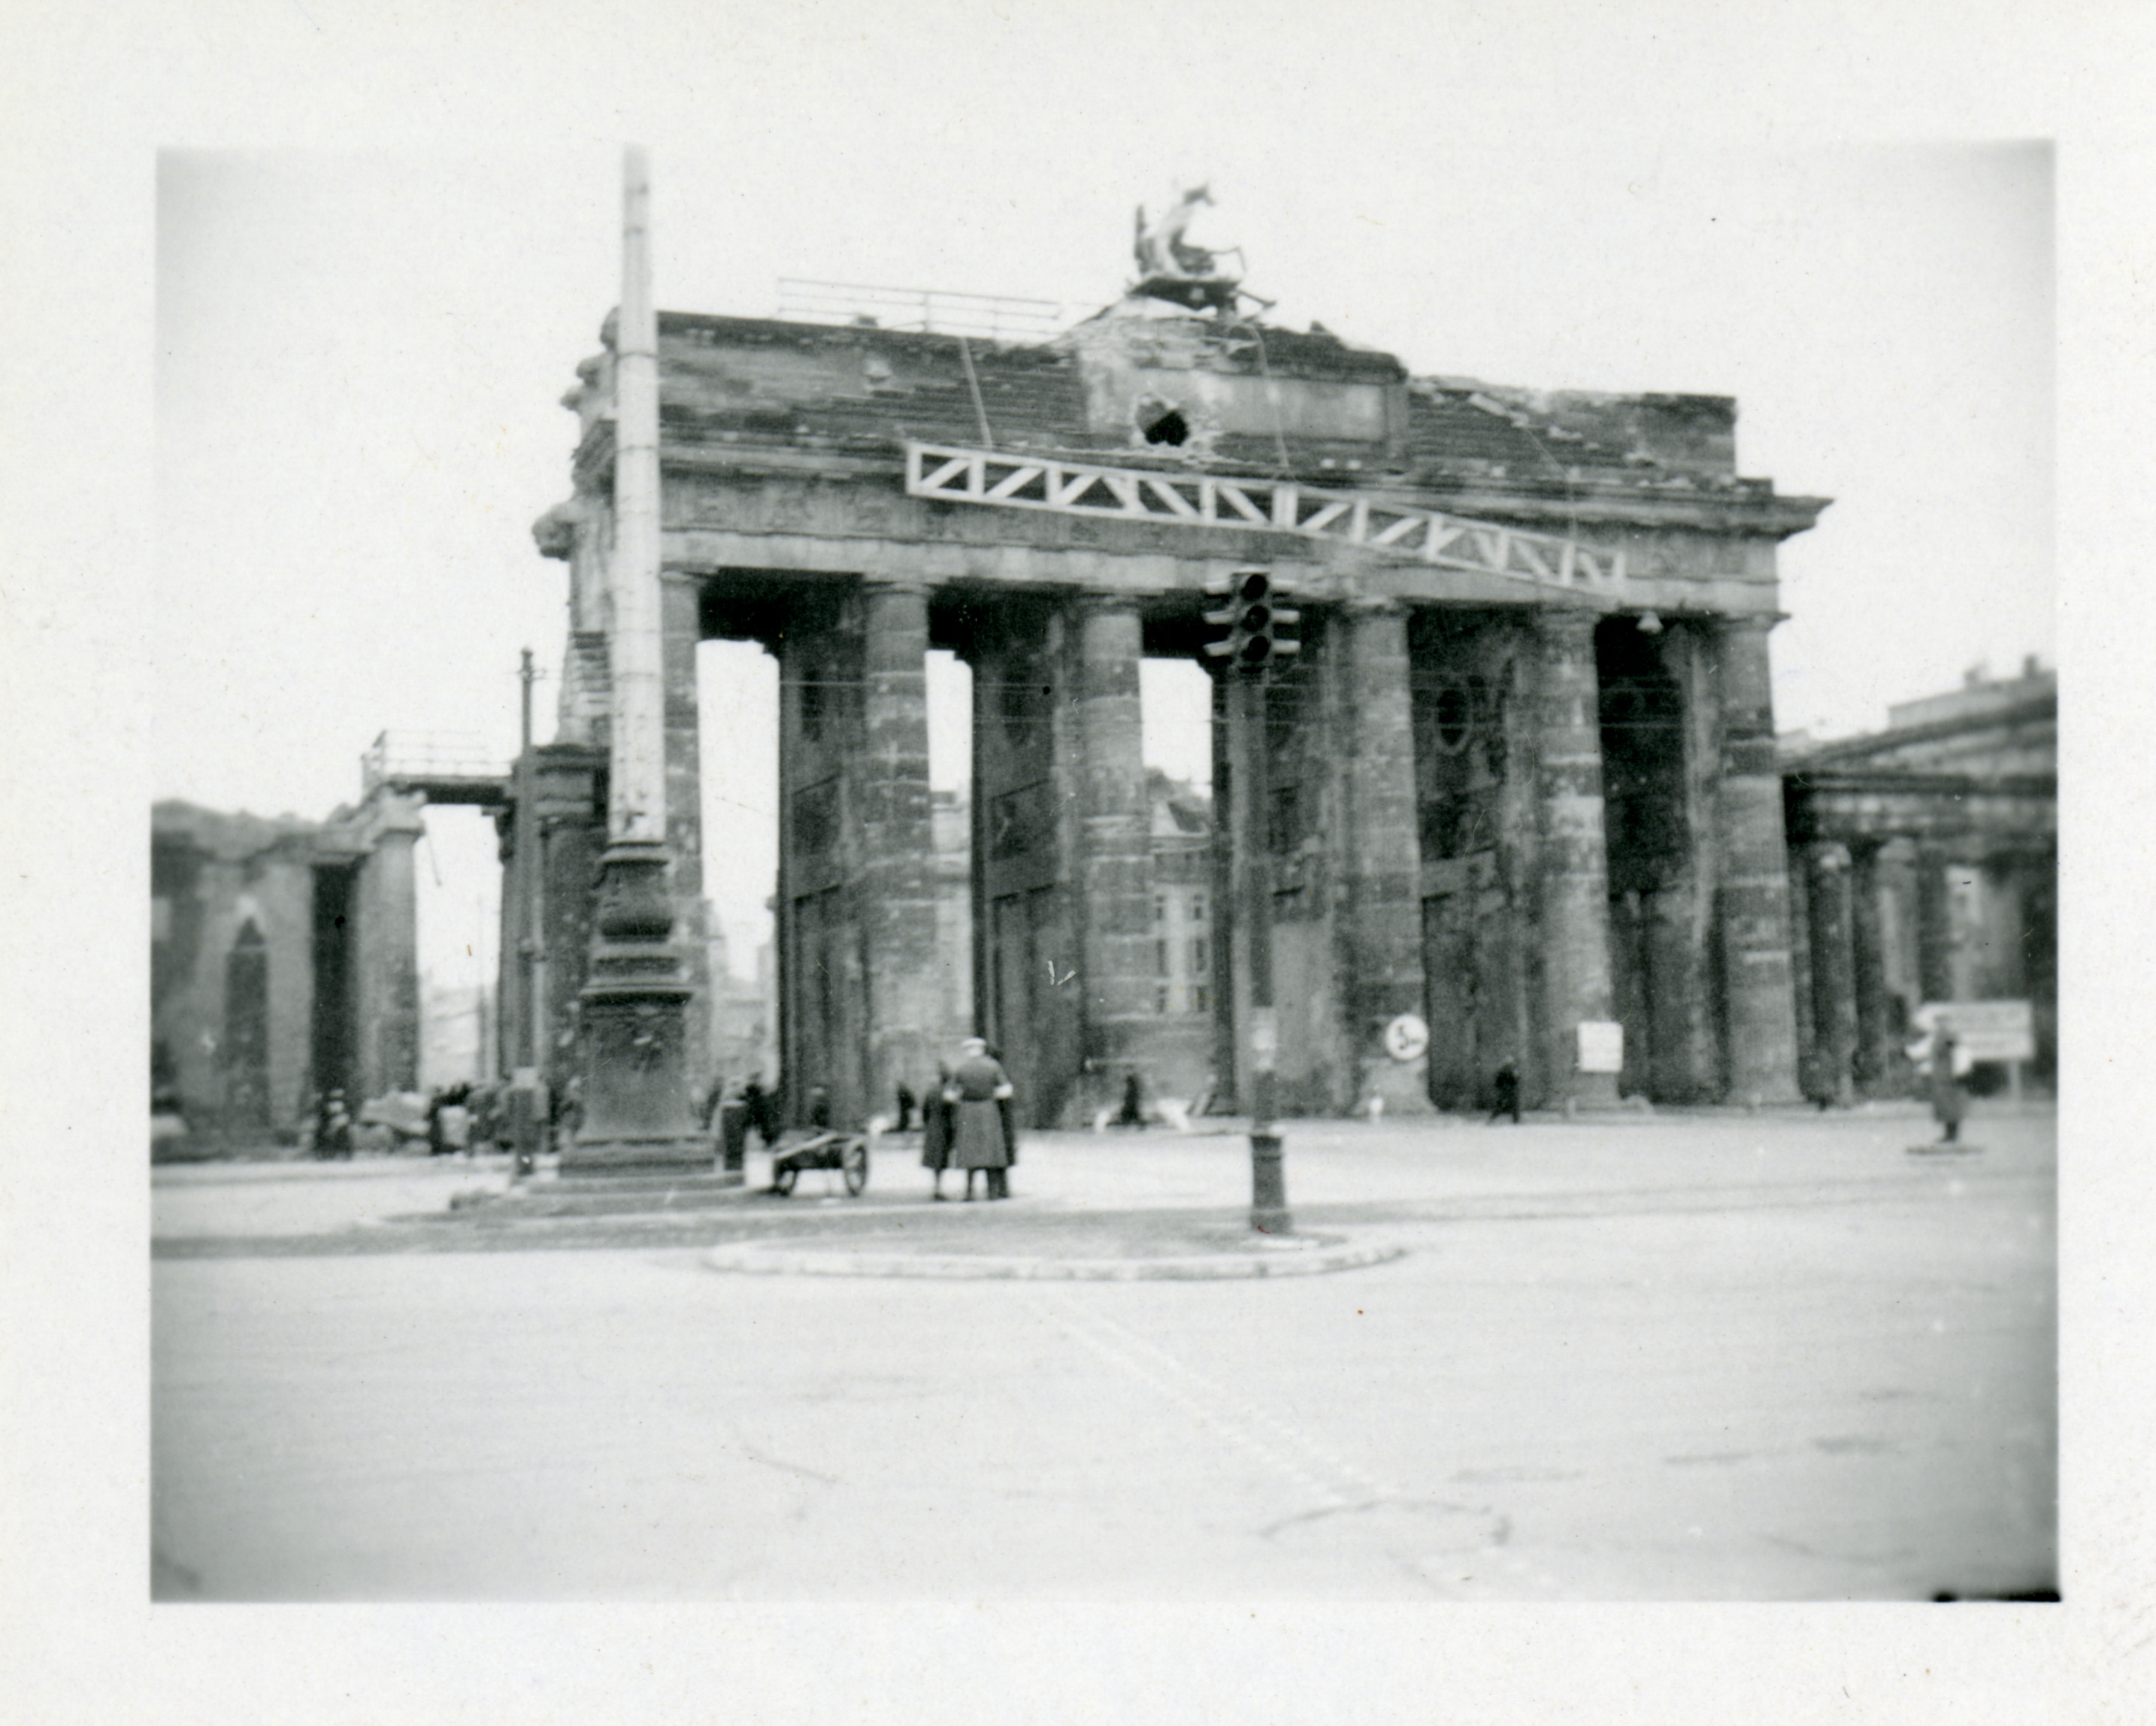 Damaged Brandenburg Gate In Berlin Germany In The Winter Of 1945 46 The Digital Collections Of The National Wwii Museum Oral Histories